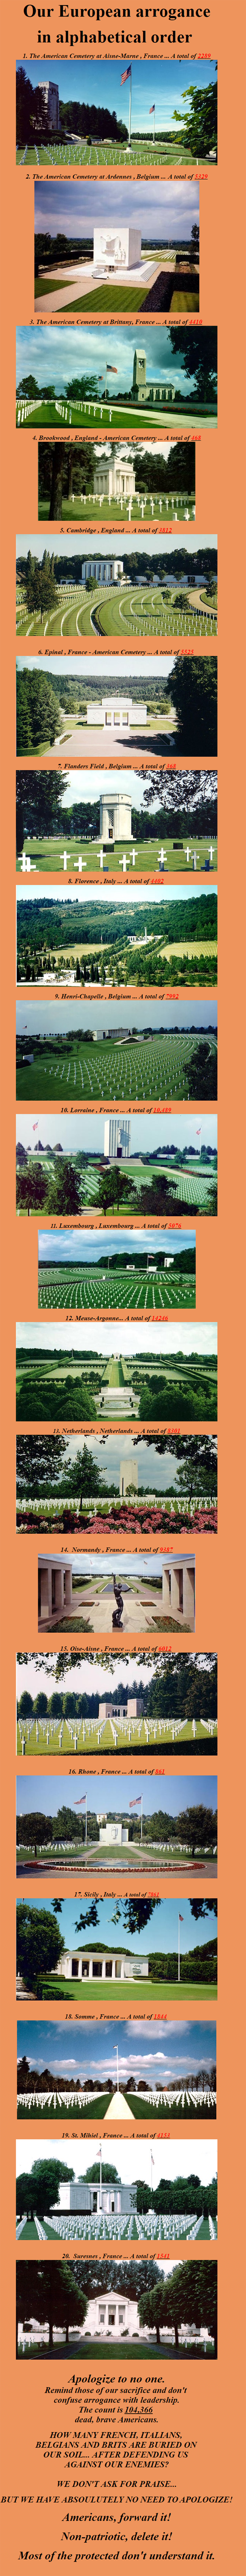 American military cemeteries in Europa